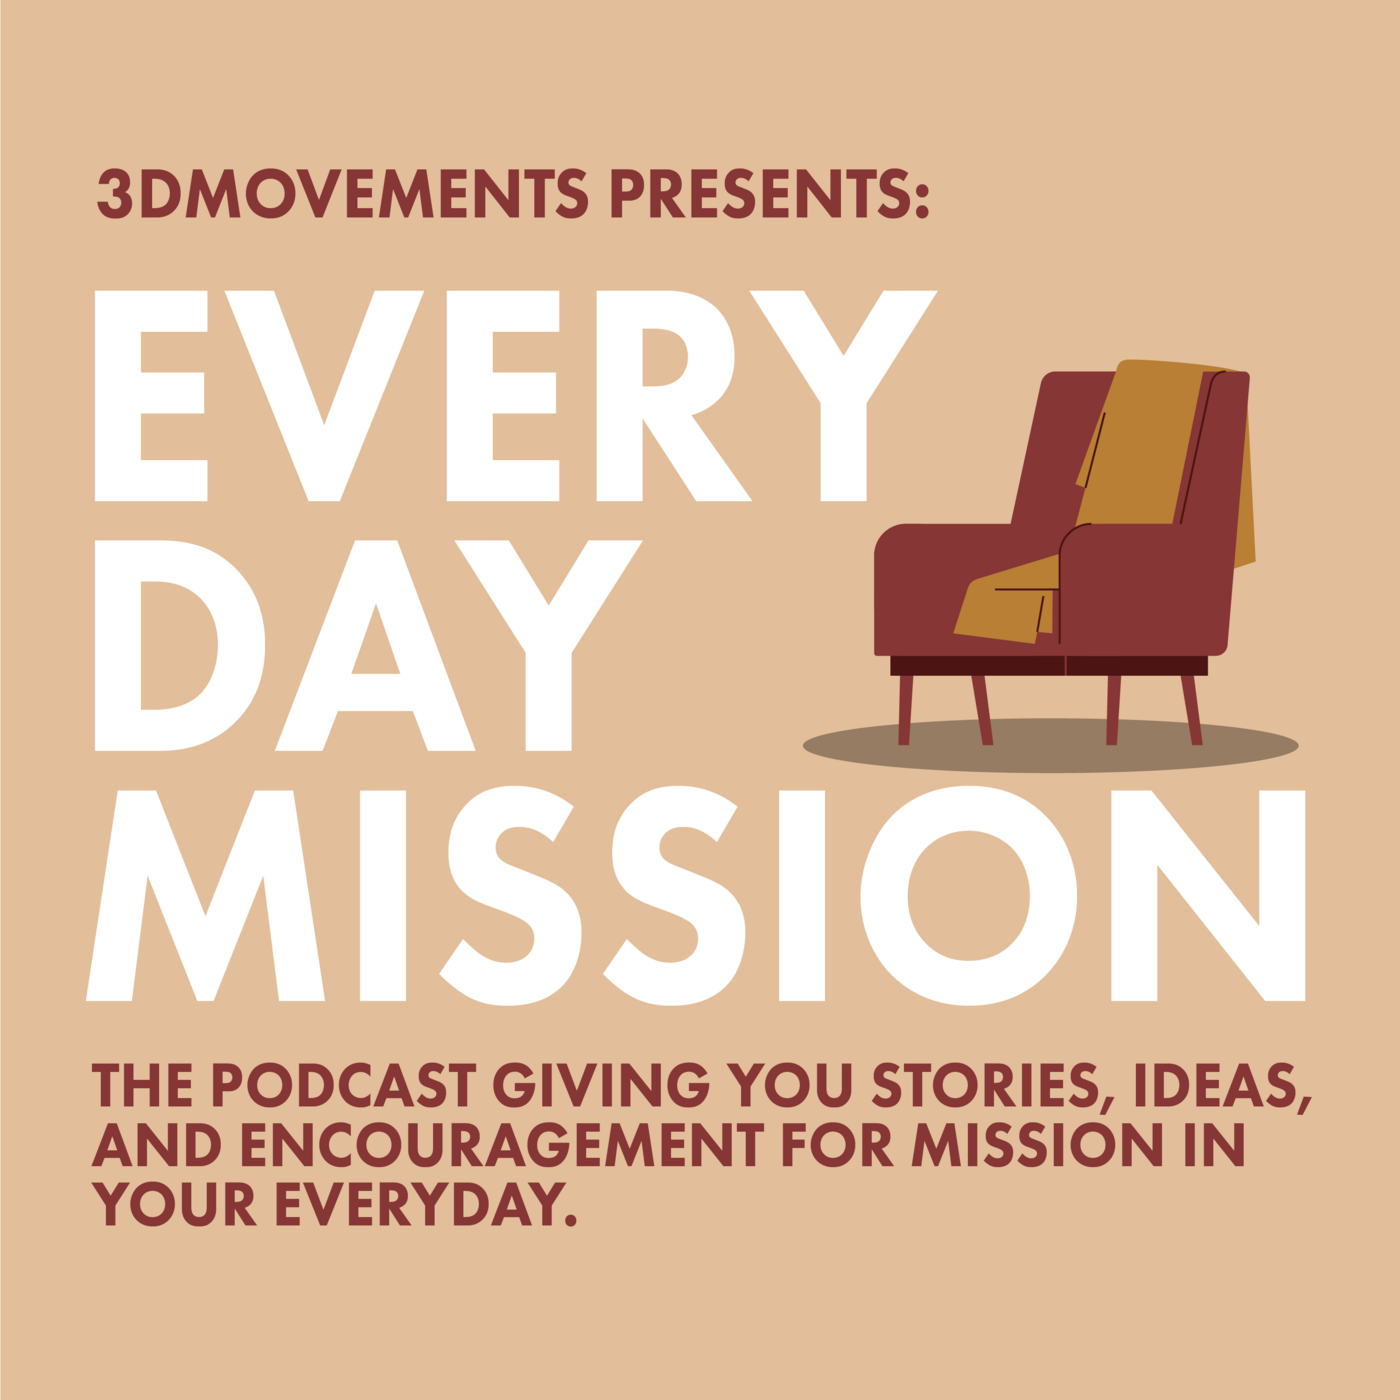 Everyday Miracles Podcast on Apple Podcasts